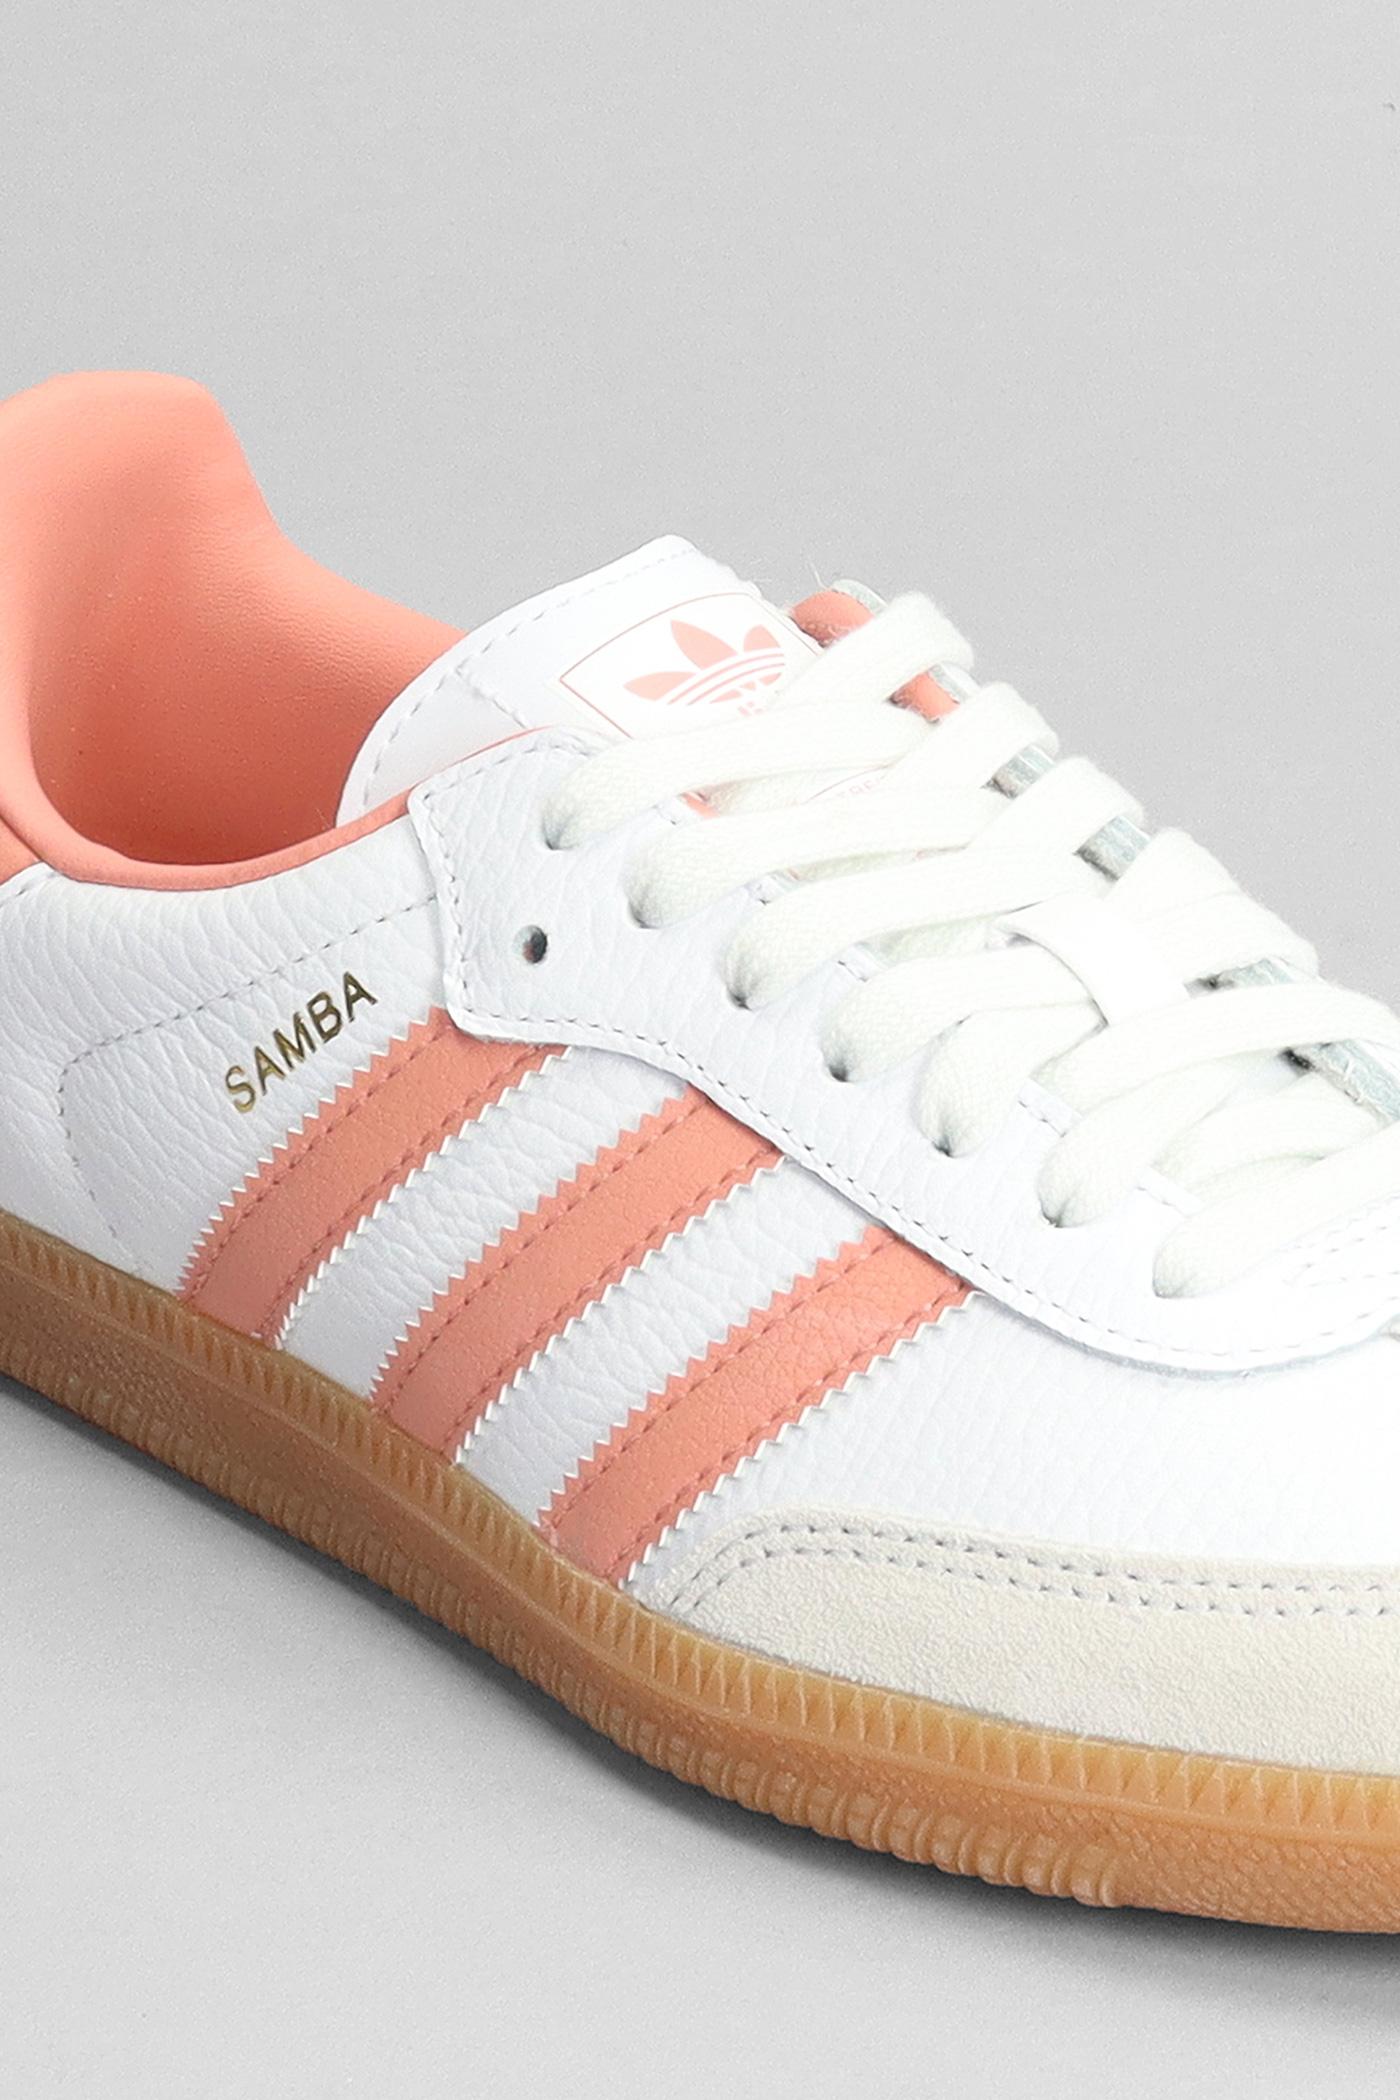 adidas Samba Og W Sneakers In White Suede And Leather in Pink | Lyst